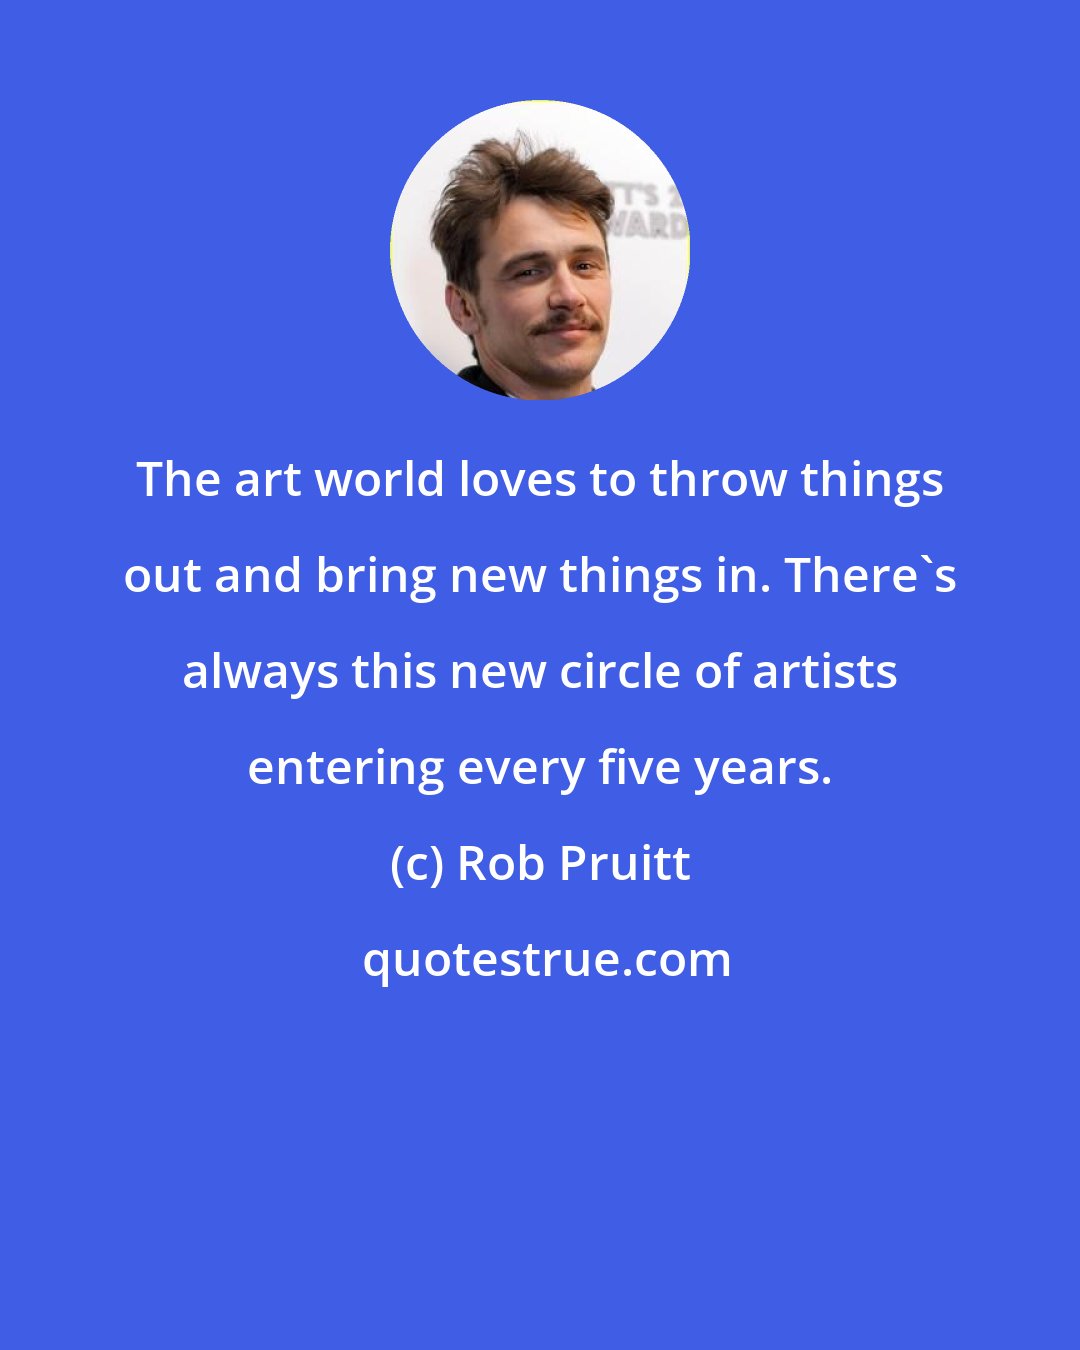 Rob Pruitt: The art world loves to throw things out and bring new things in. There's always this new circle of artists entering every five years.